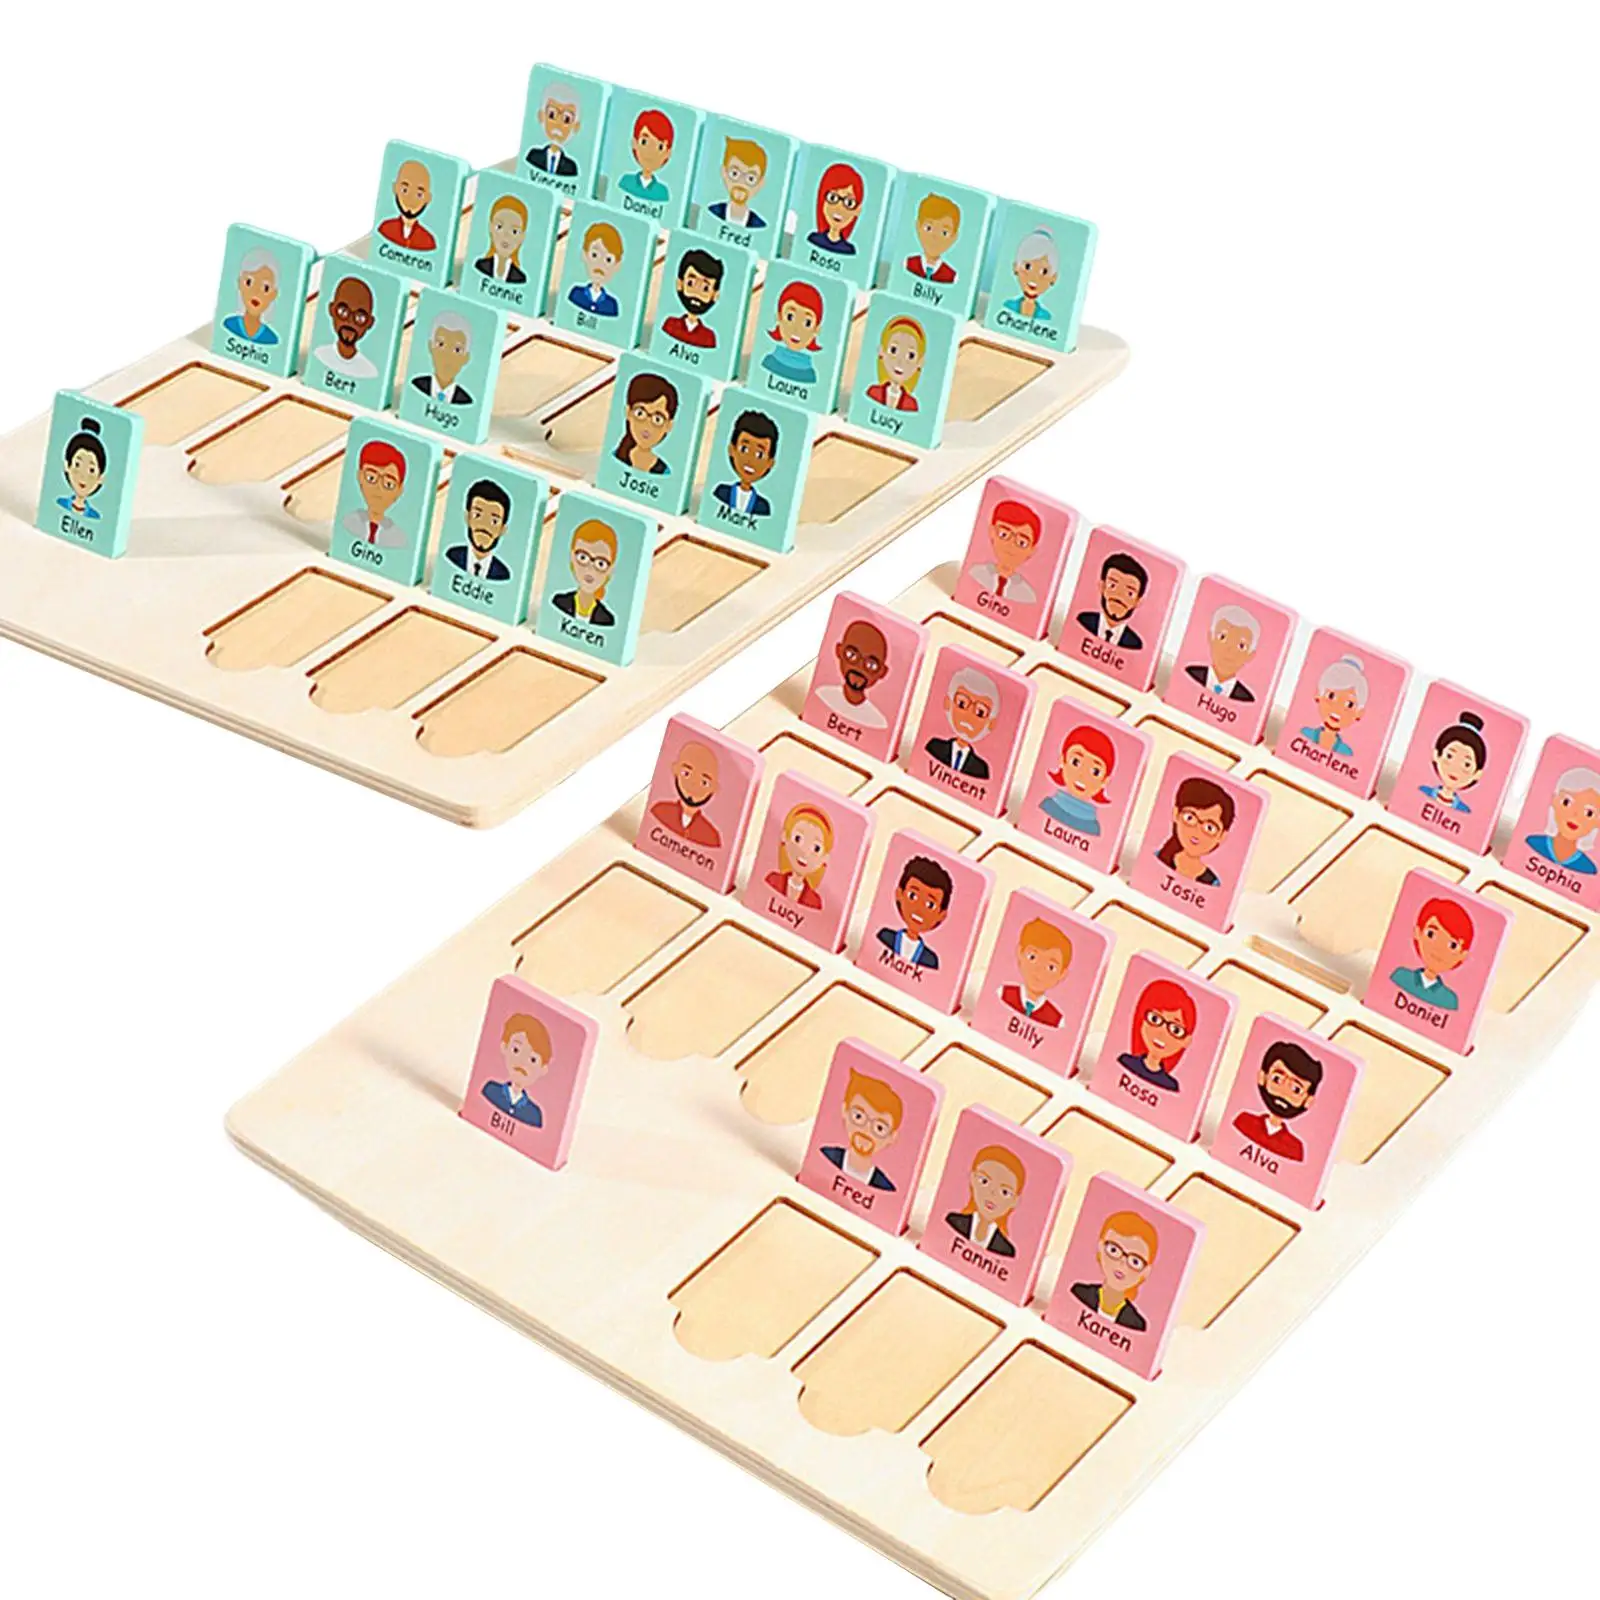 Family Guessing Game Who Classic Board toys Memory Games Learning Activities Puzzle toys Game Leisure Time Training